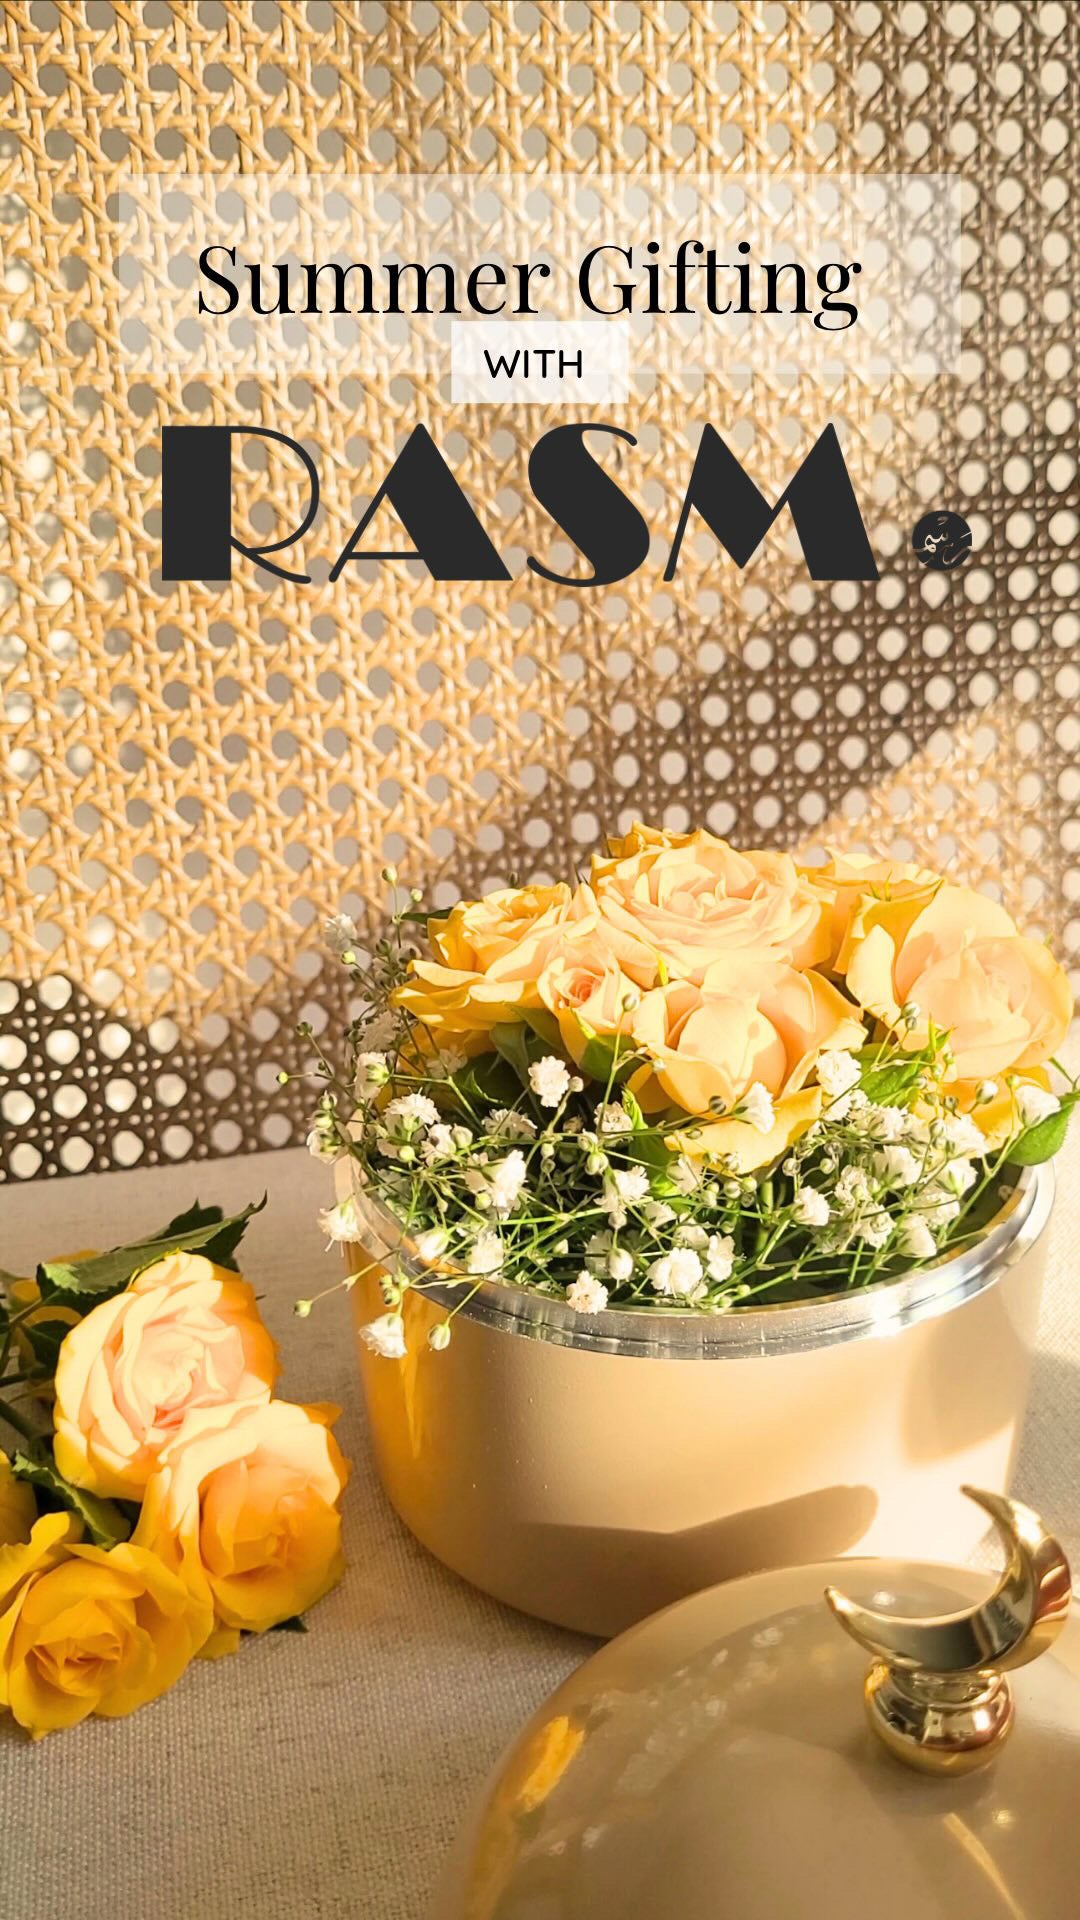 Open RASM Moon Dome Jar in Sand, filled with yellow roses and baby's breath. Photo title is Summer Gifting with RASM. roses and baby